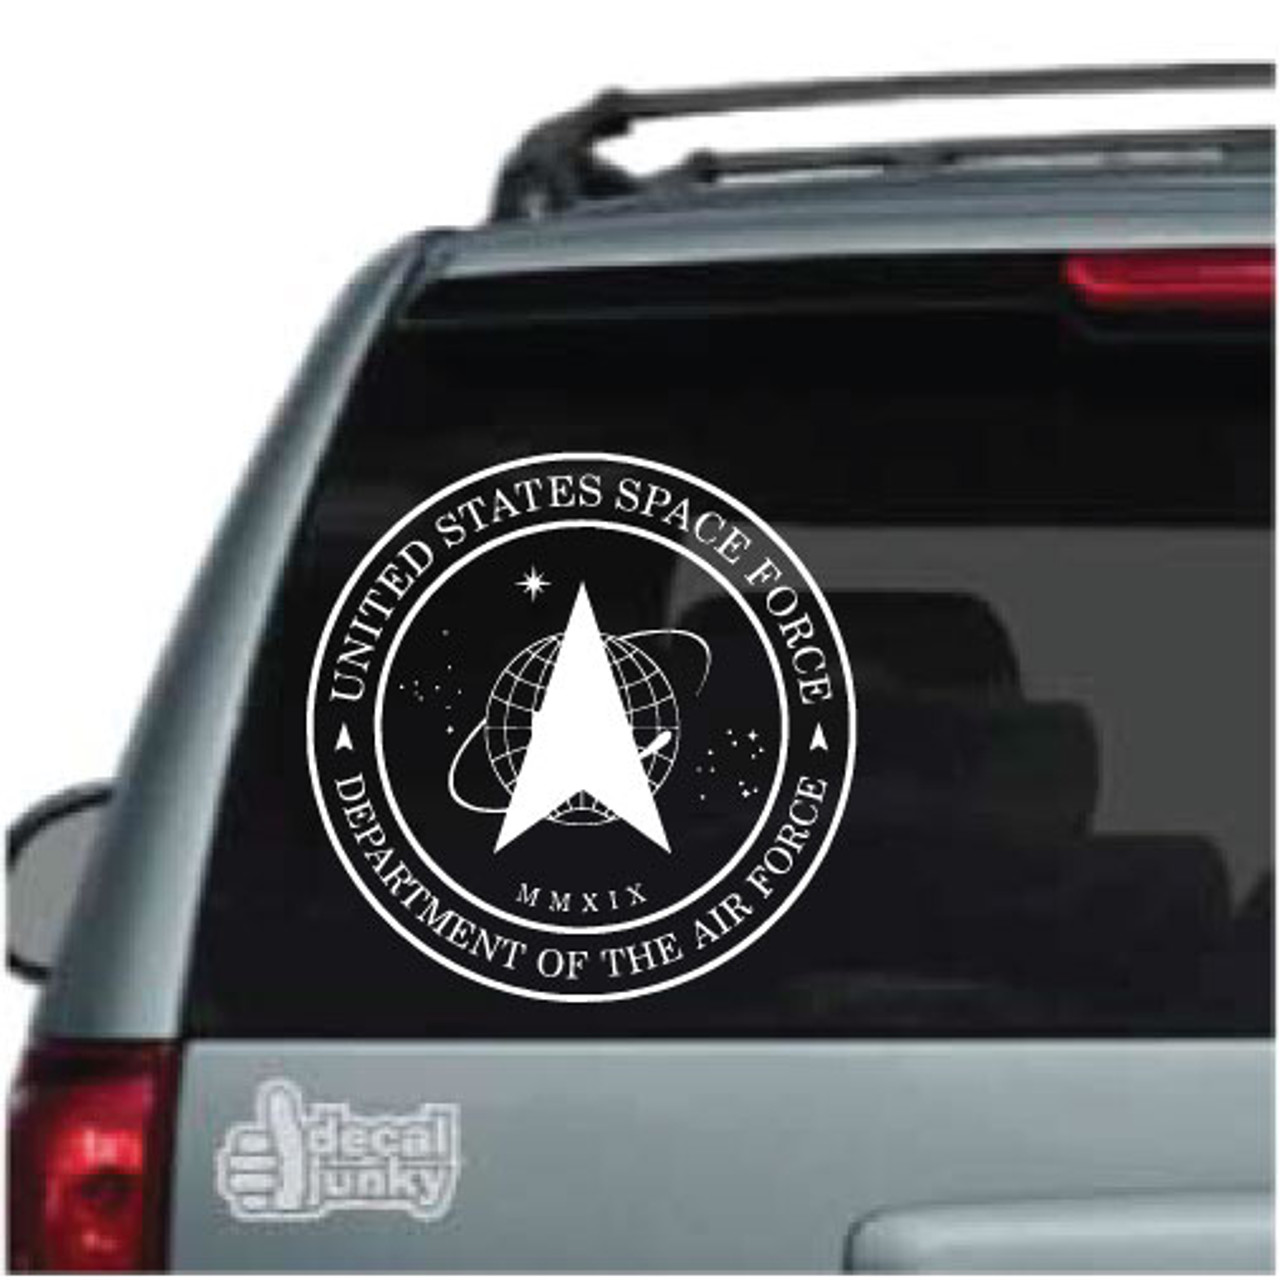 The United States Space Force Car Decals & Stickers | Decal Junky